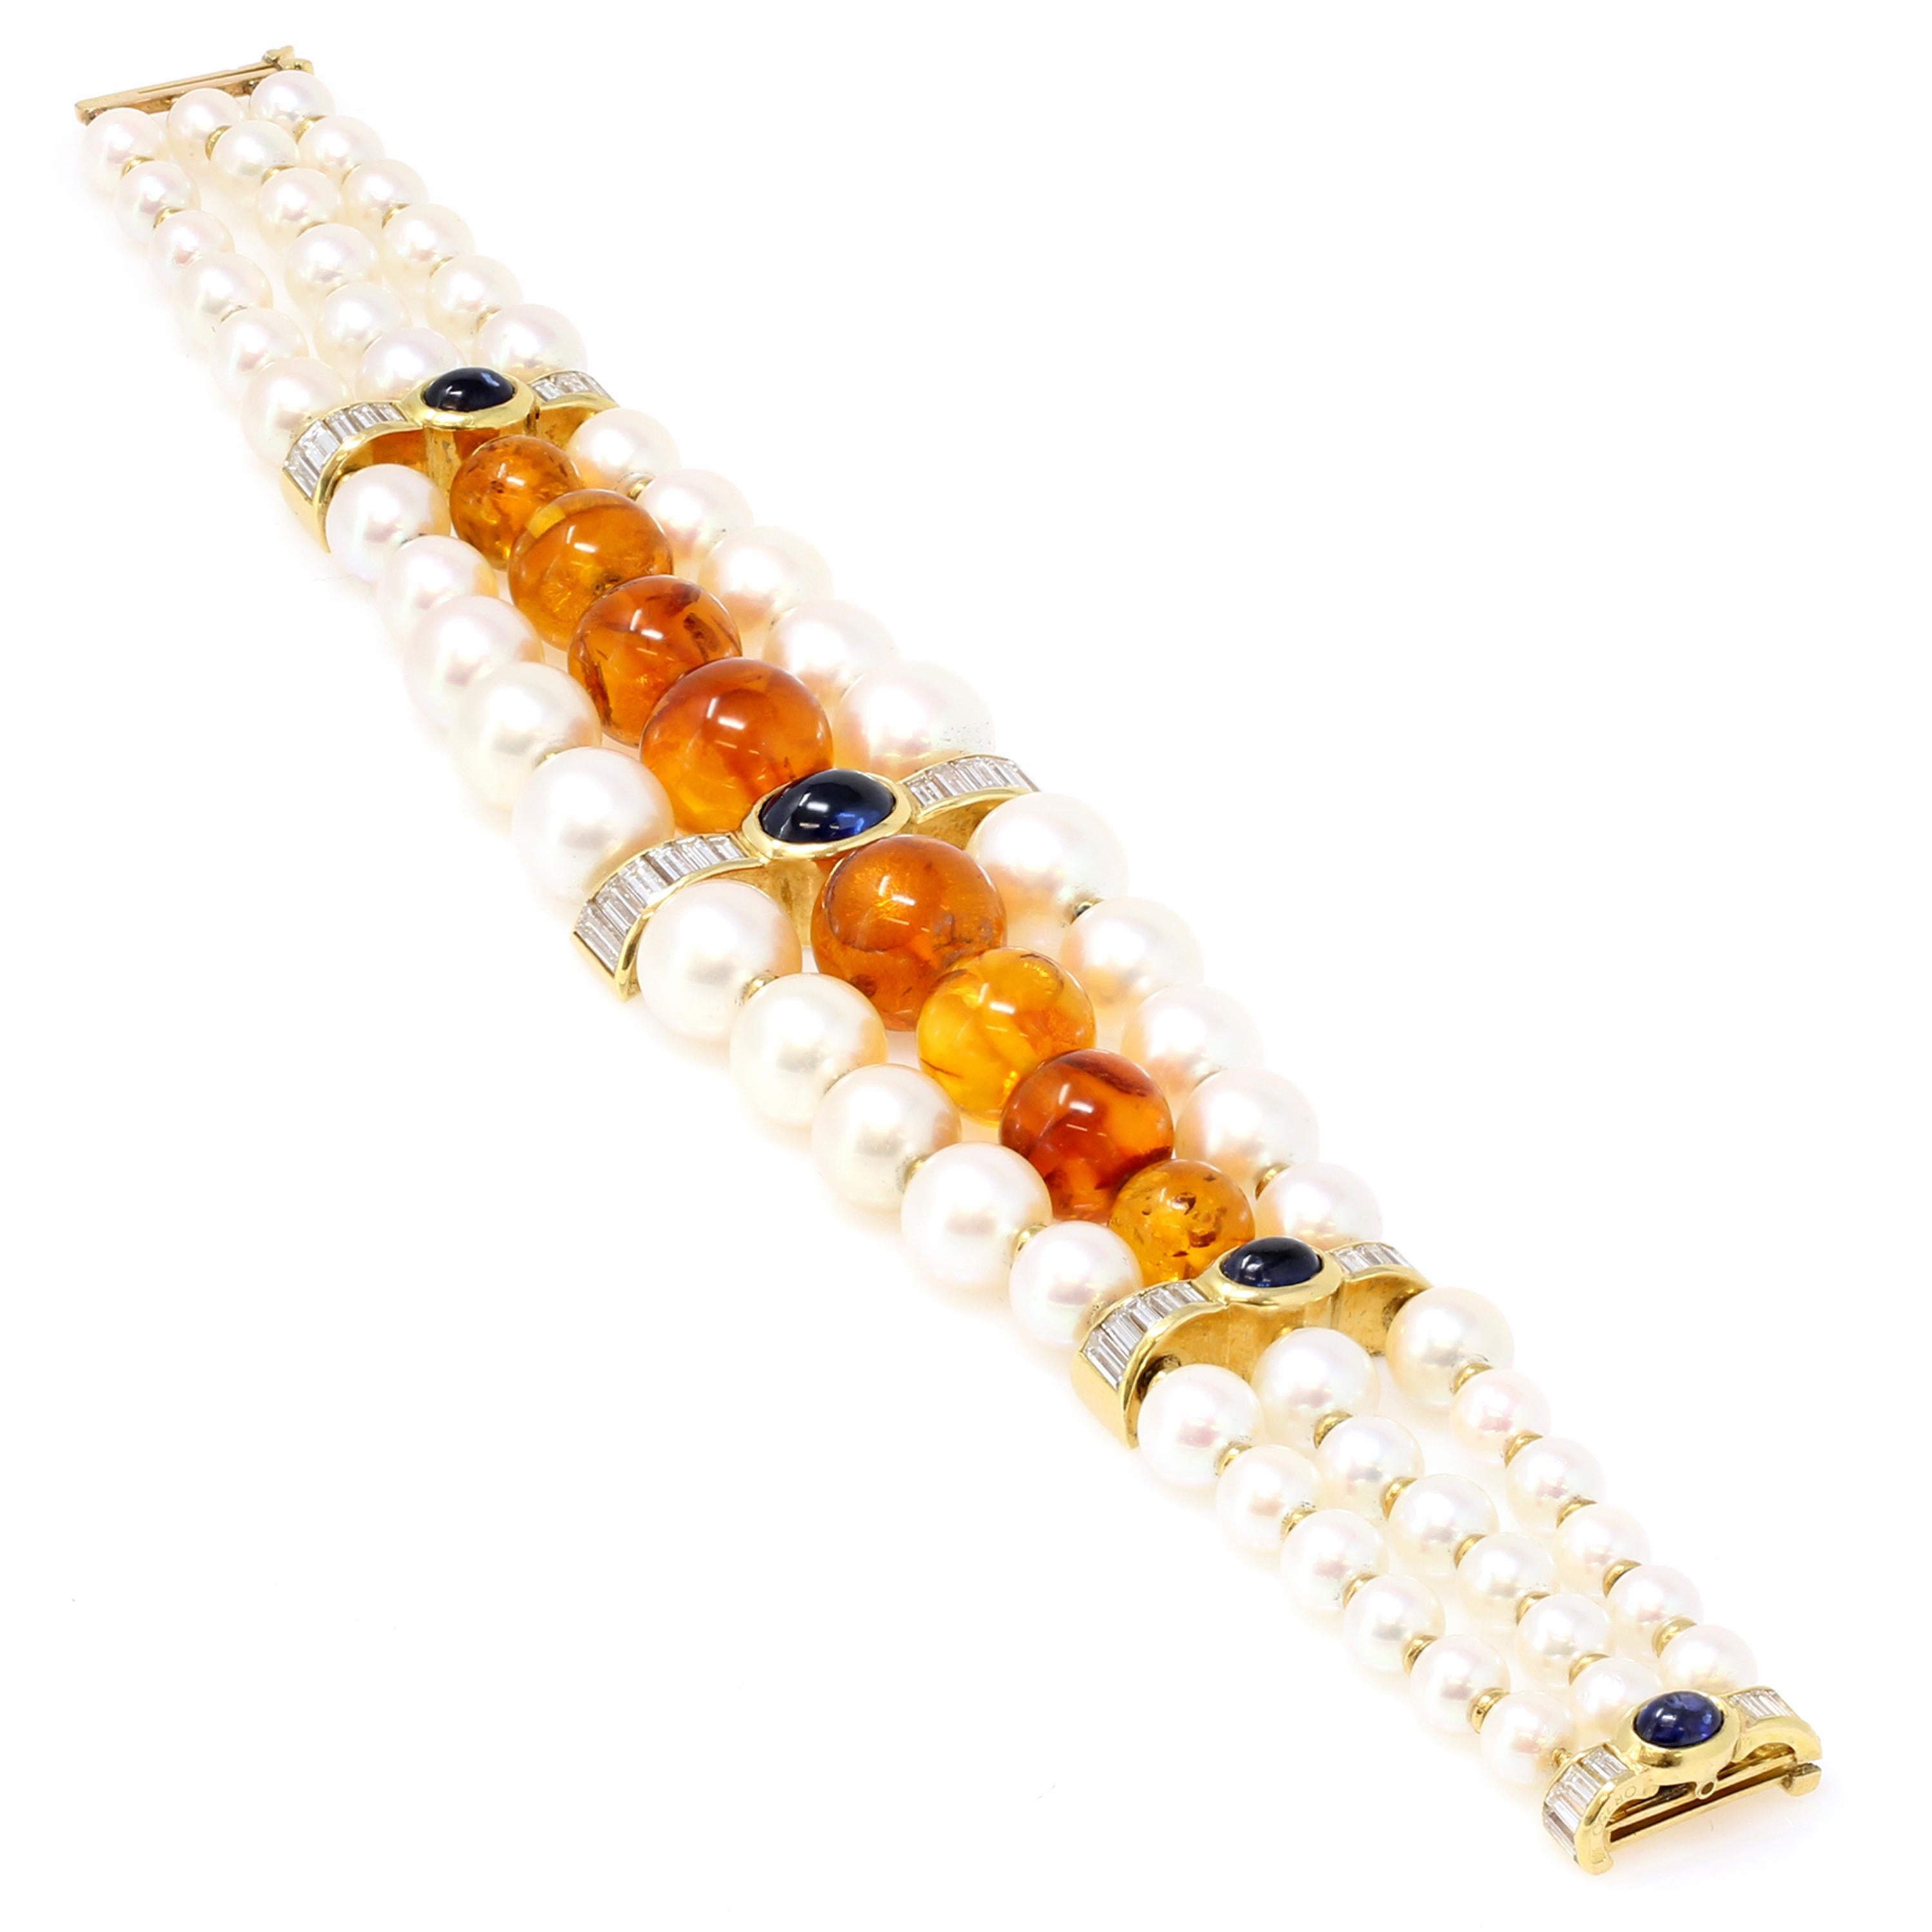 A French signed Boucheron Akoya pearl, amber, sapphire and diamond bracelet from the 1980s, in 18K yellow gold. One of its kind and of high end quality, this signed Boucheron bracelet showcases a row of amber beads ranging from 8 to 11 mm,